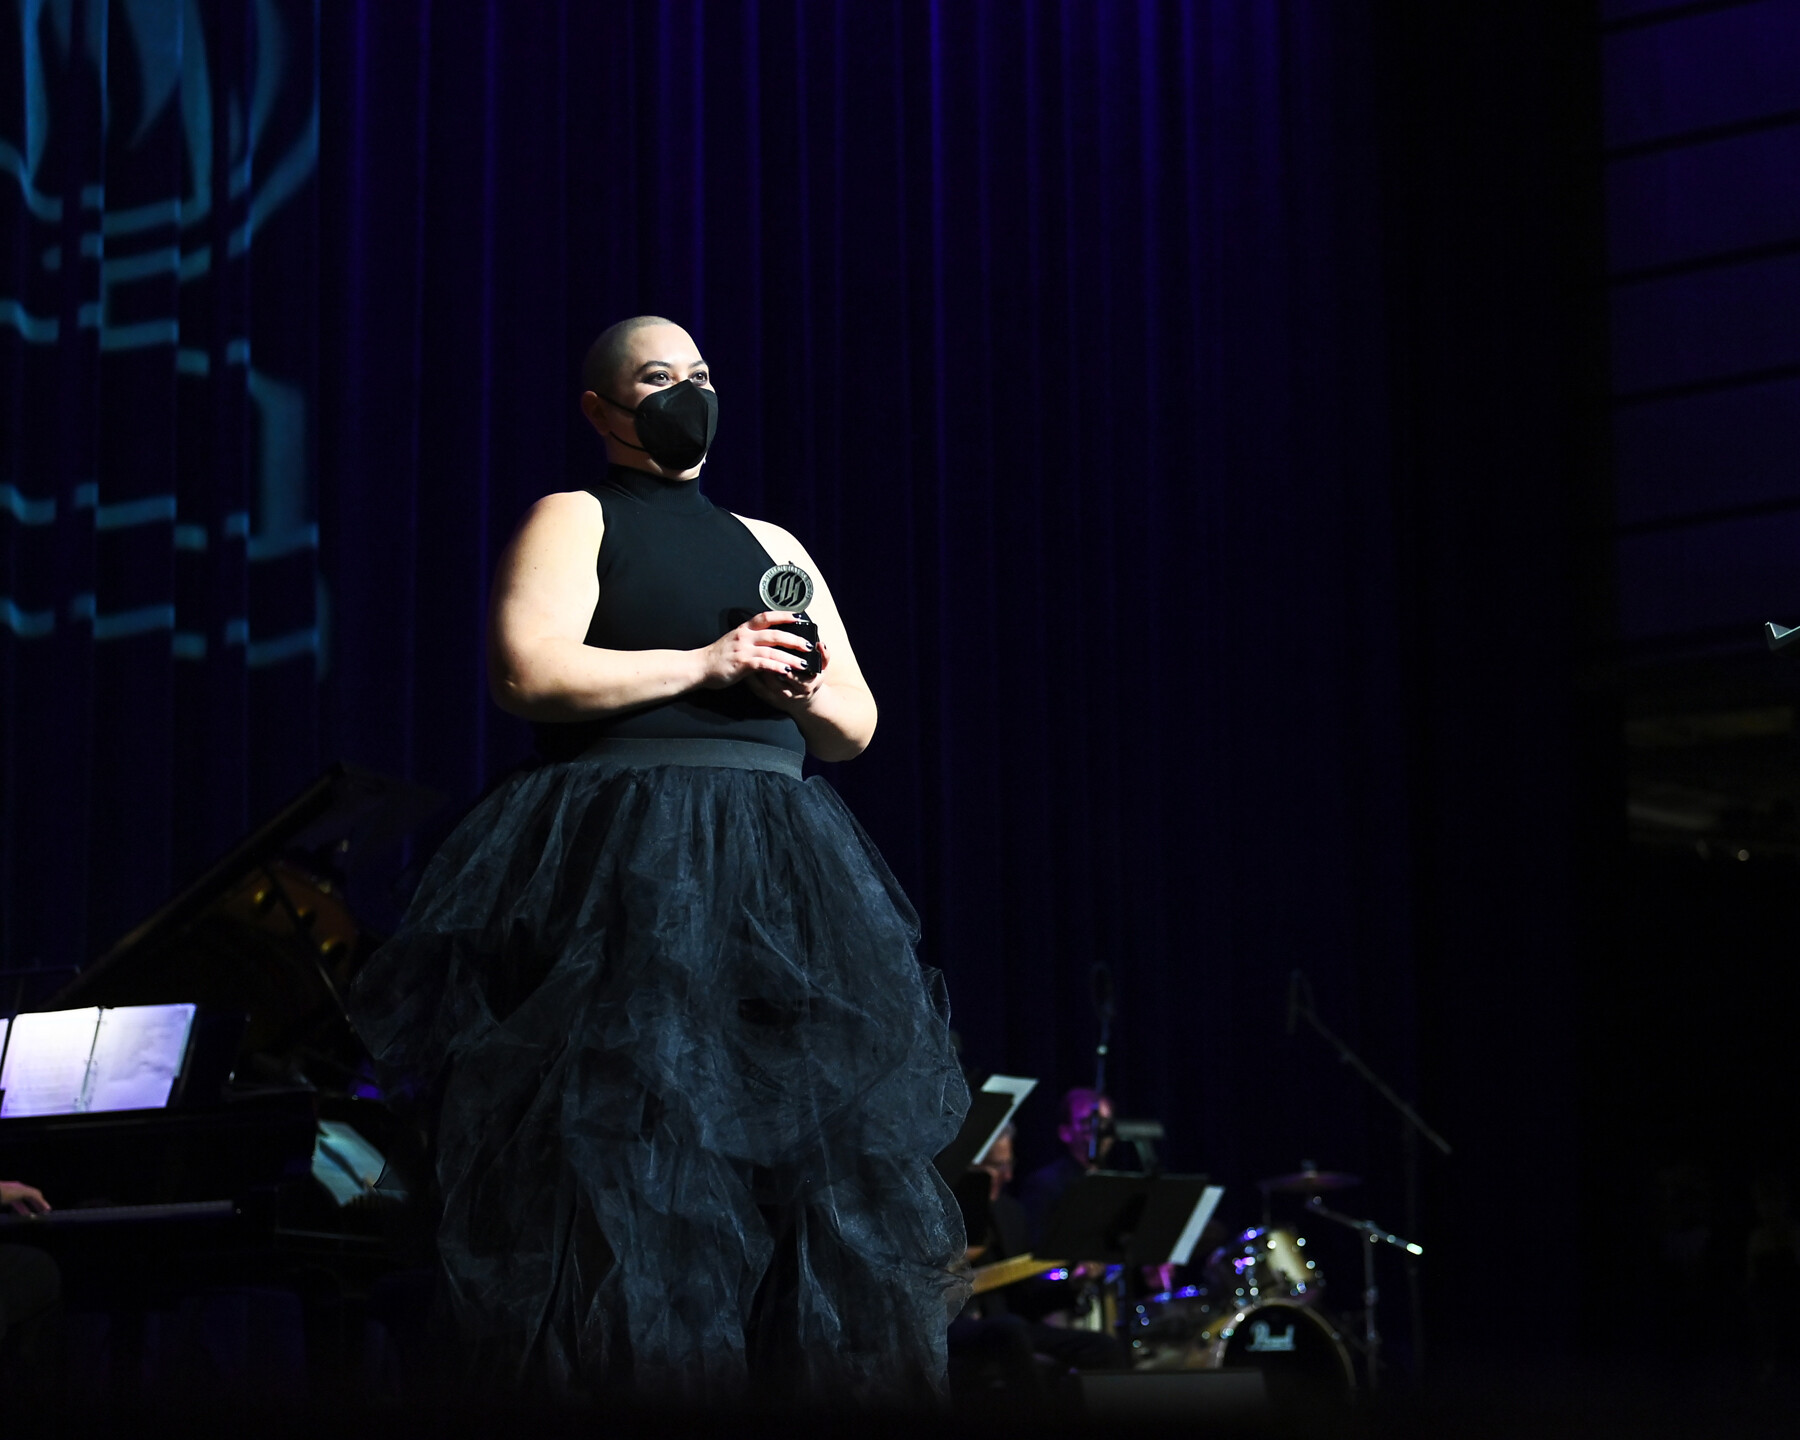 A person in a black mask presents an award onstage.